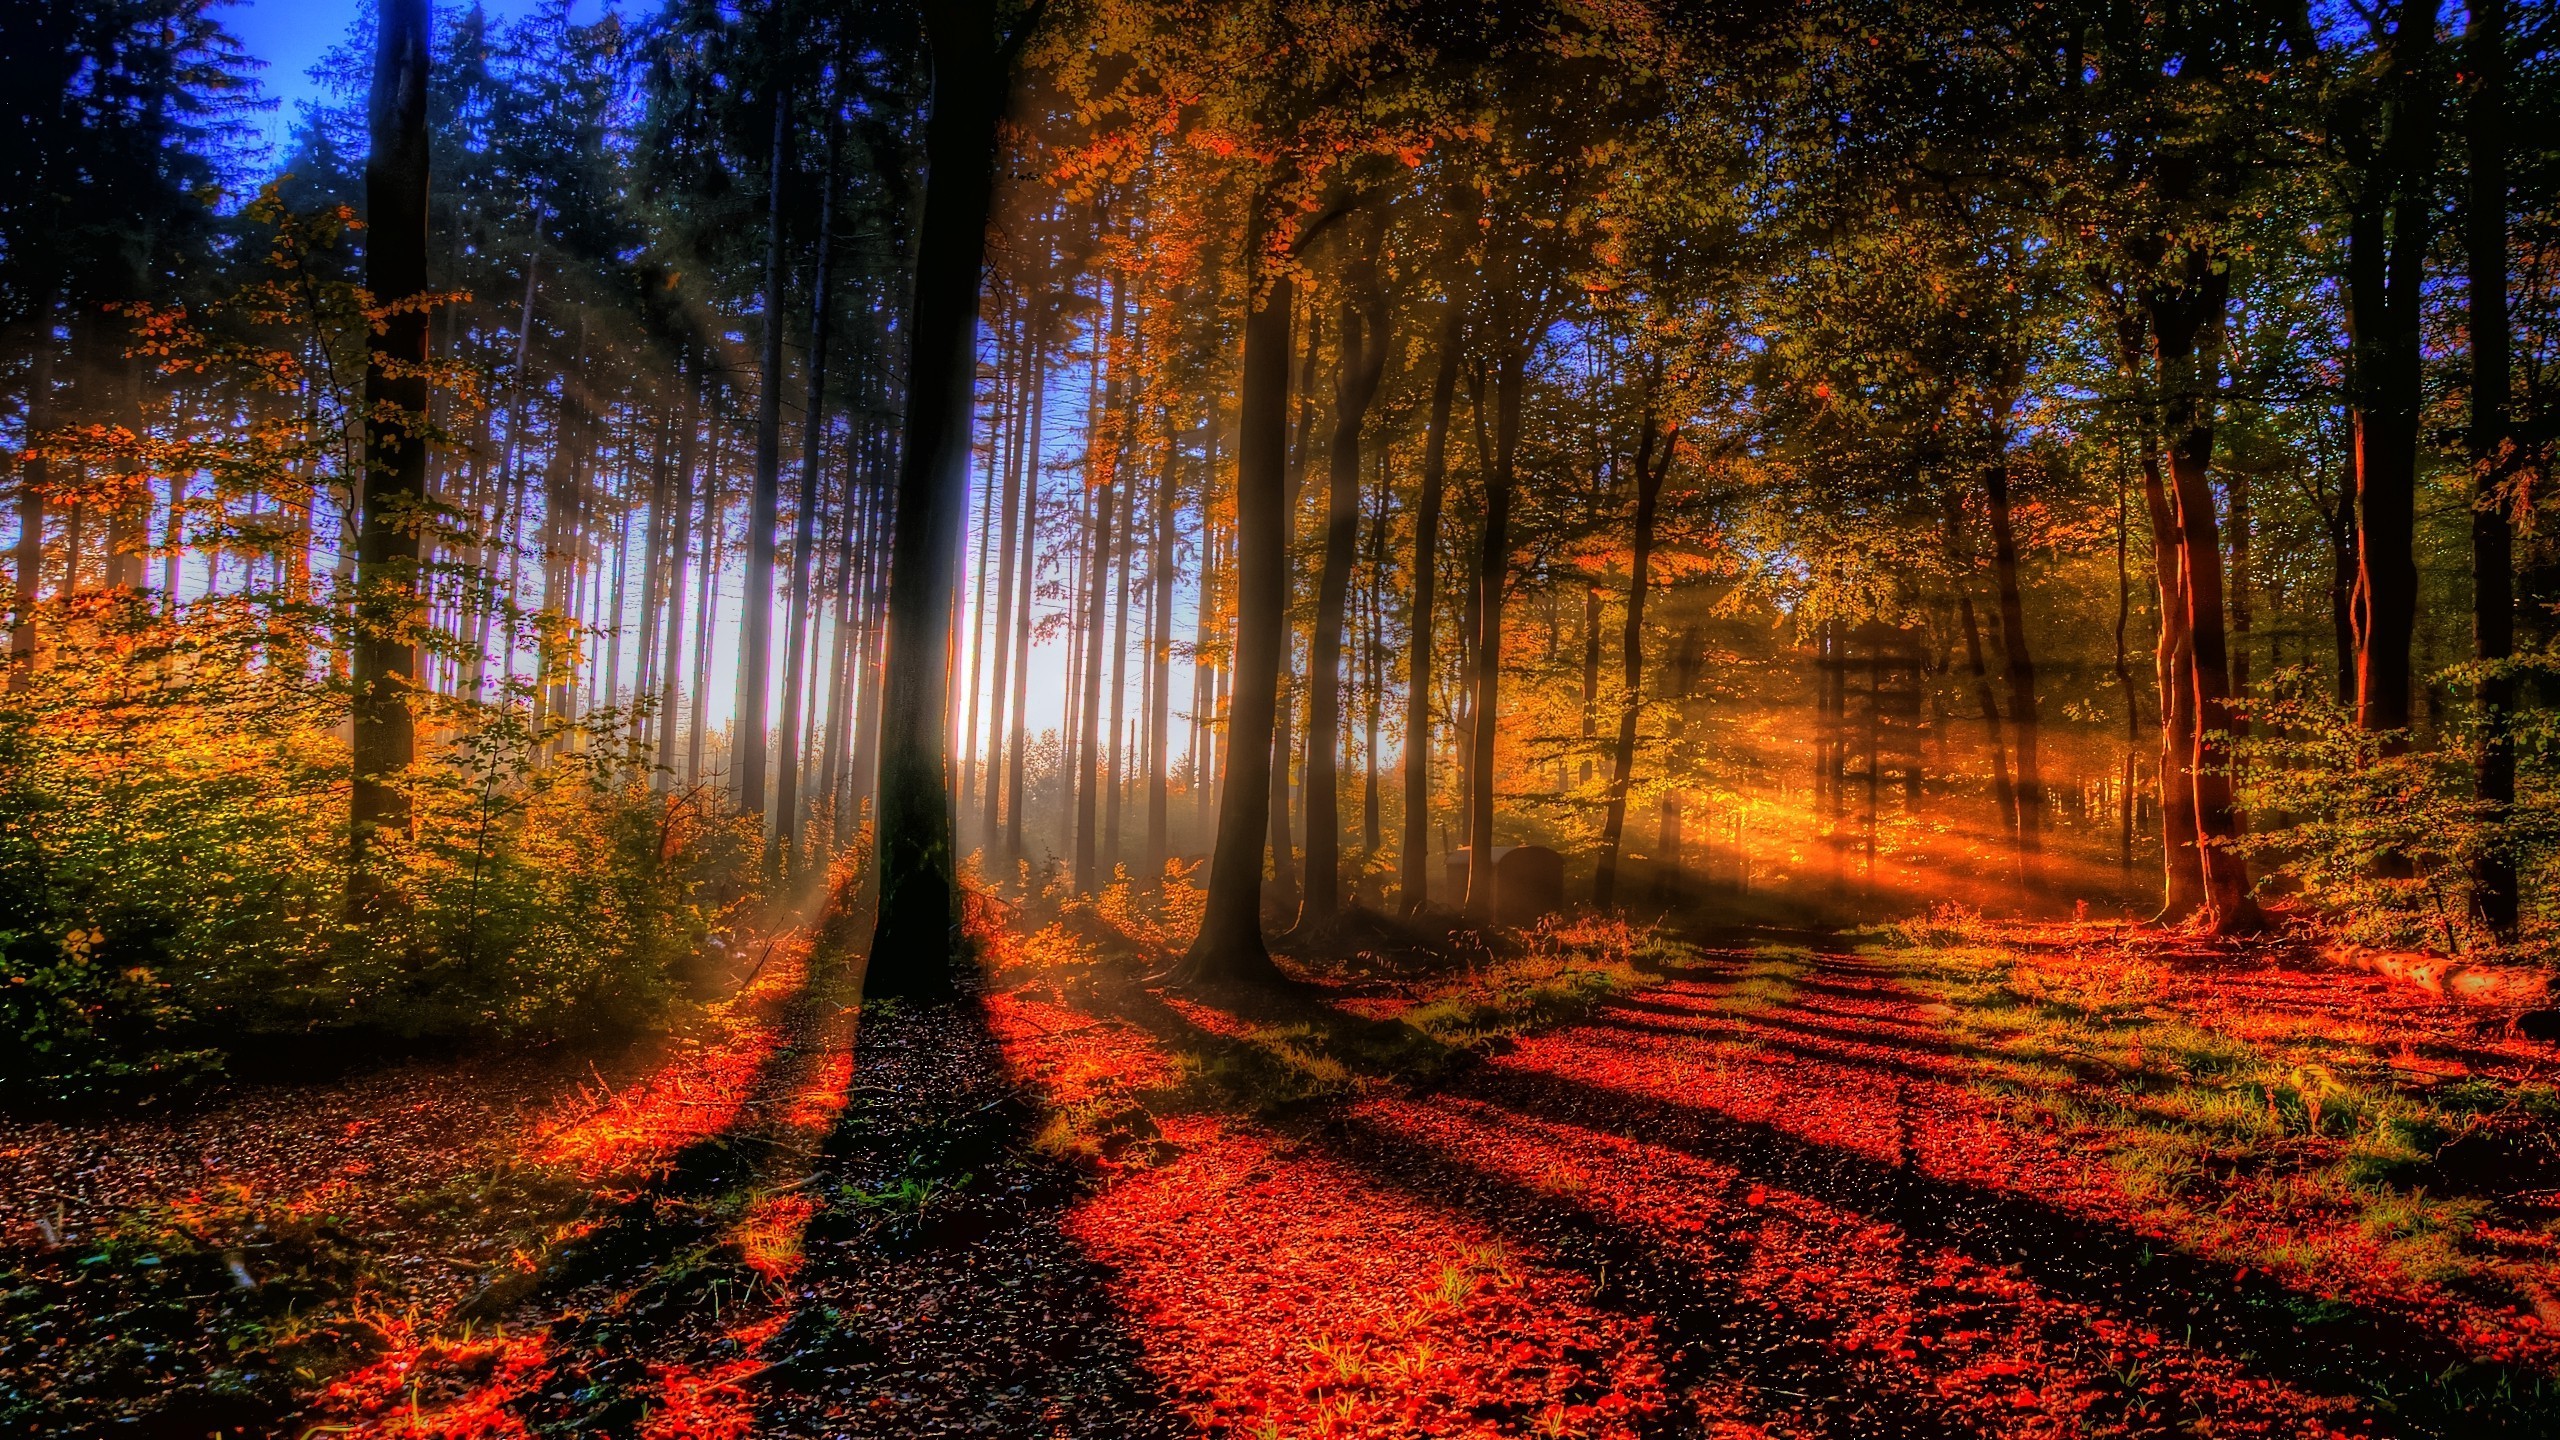 Forest Tree Light Autumn Fall Nature HDw